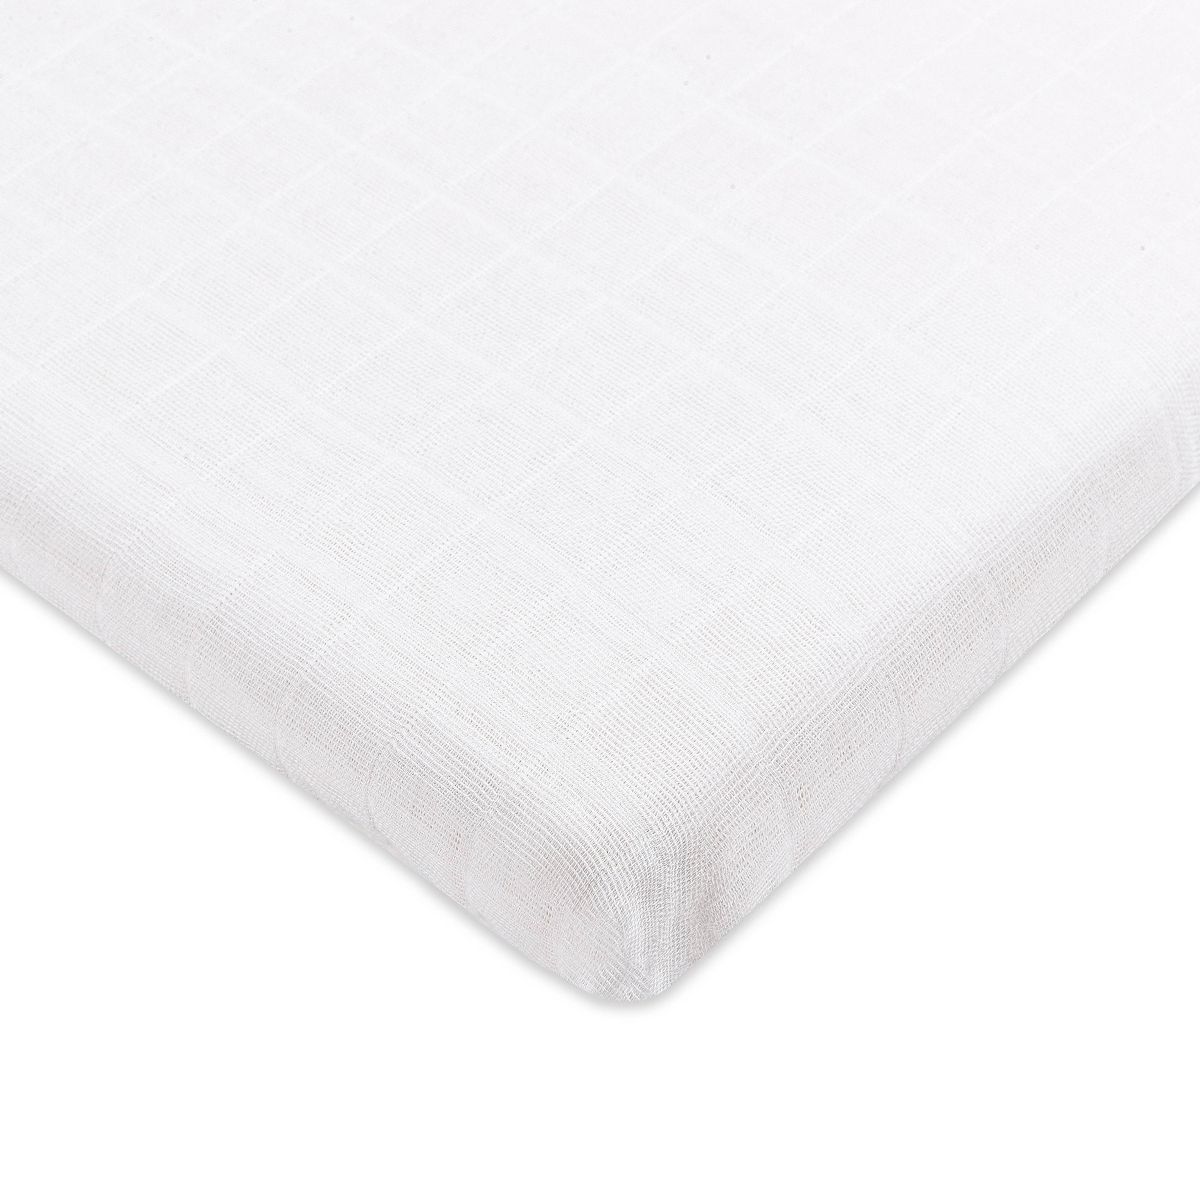 PLAIN WHITE MUSLIN ALL-STAGES BASSINET SHEET IN GOTS CERTIFIED ORGANIC COTTON